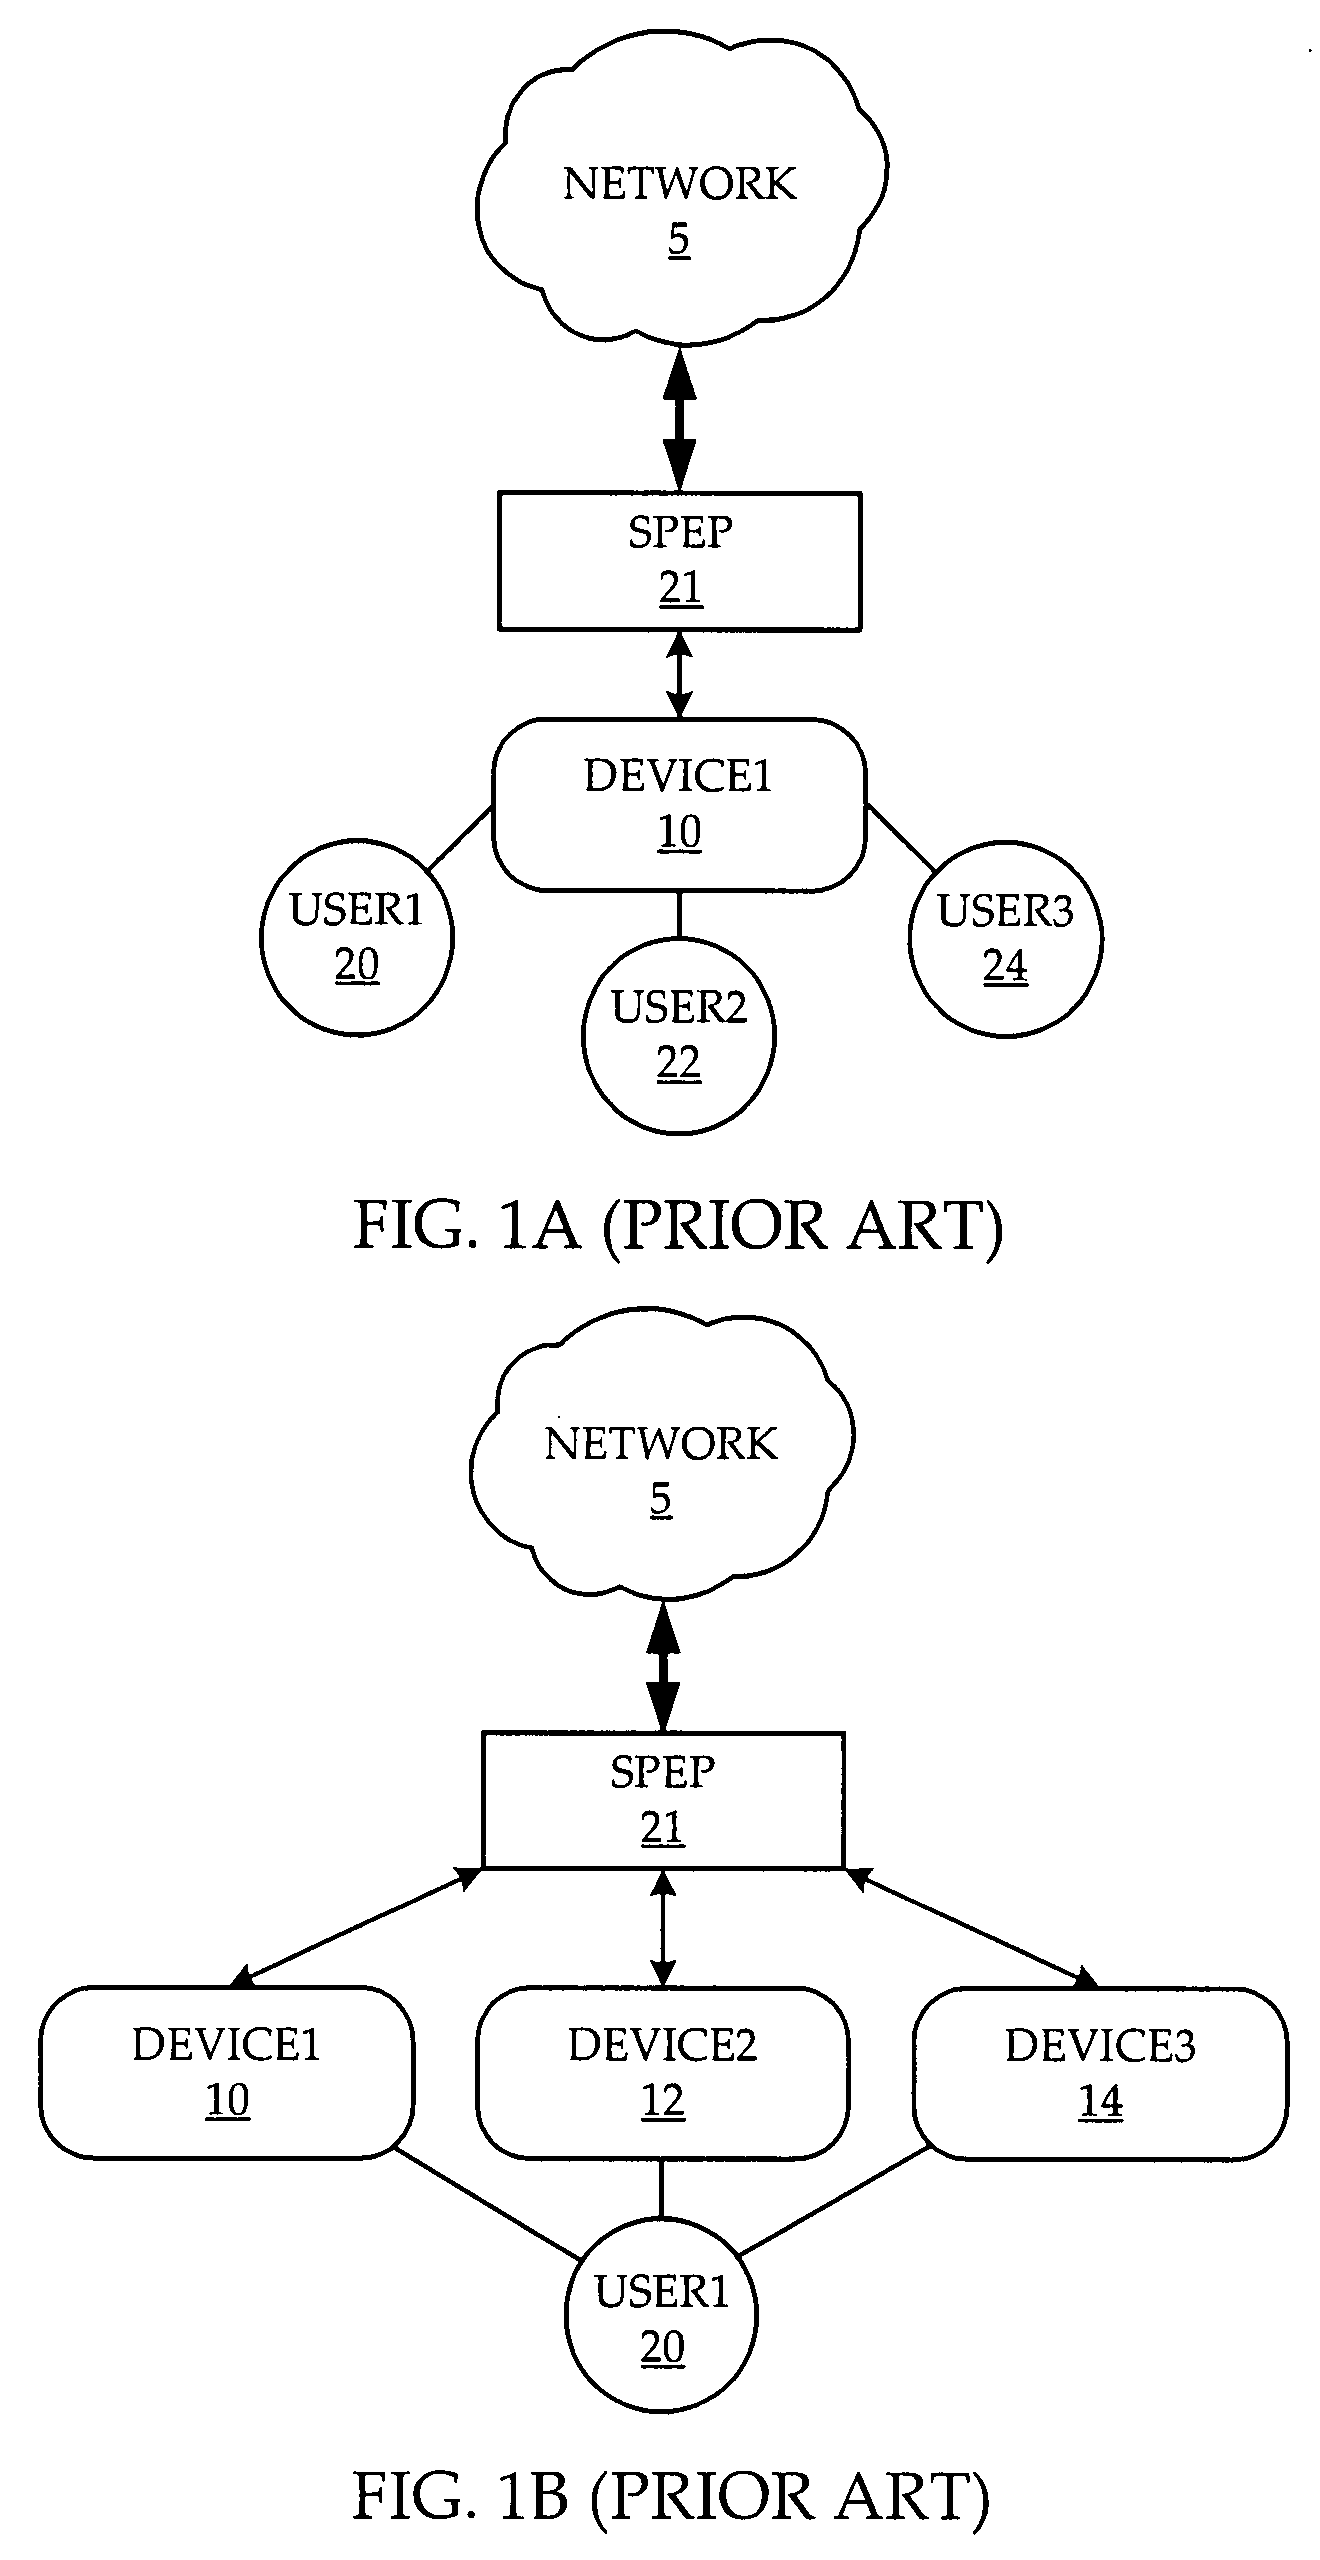 System and method of network access security policy management by user and device